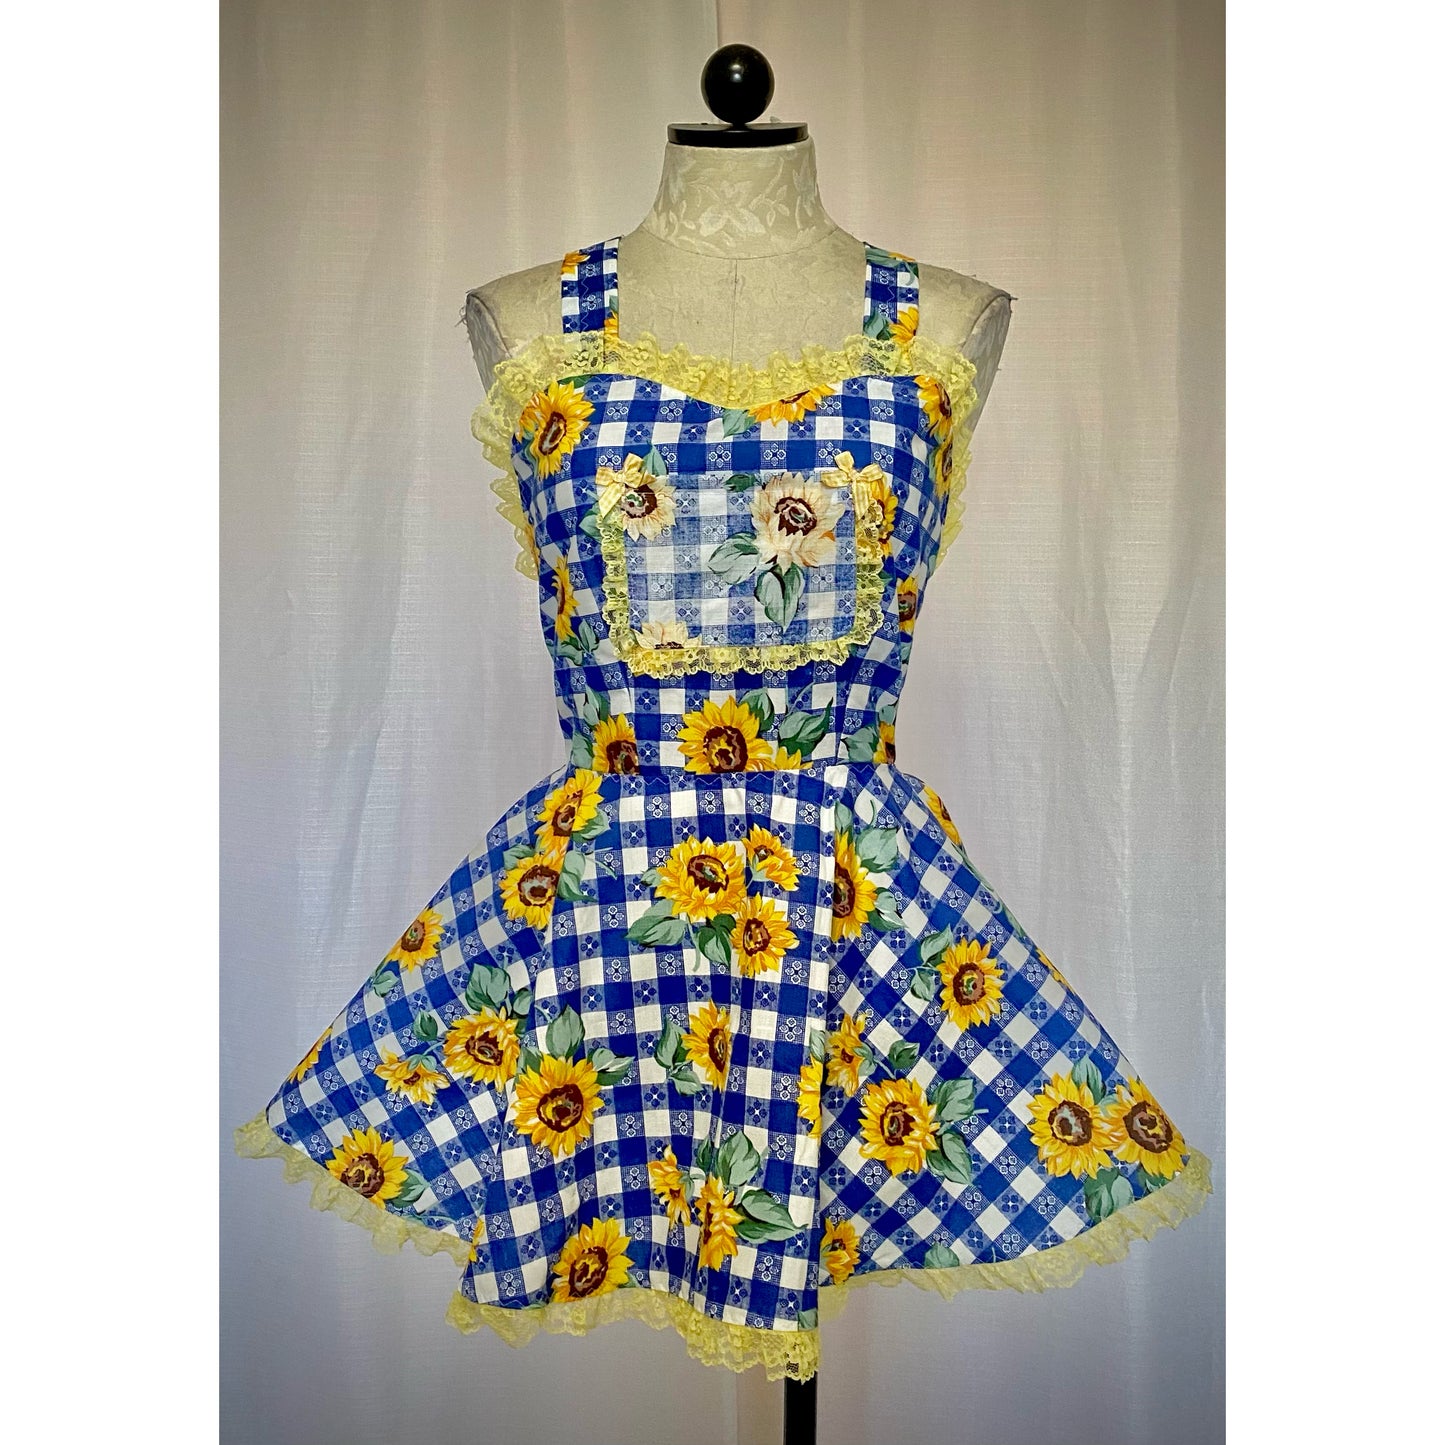 The Apron Dress in Blue Sunflower